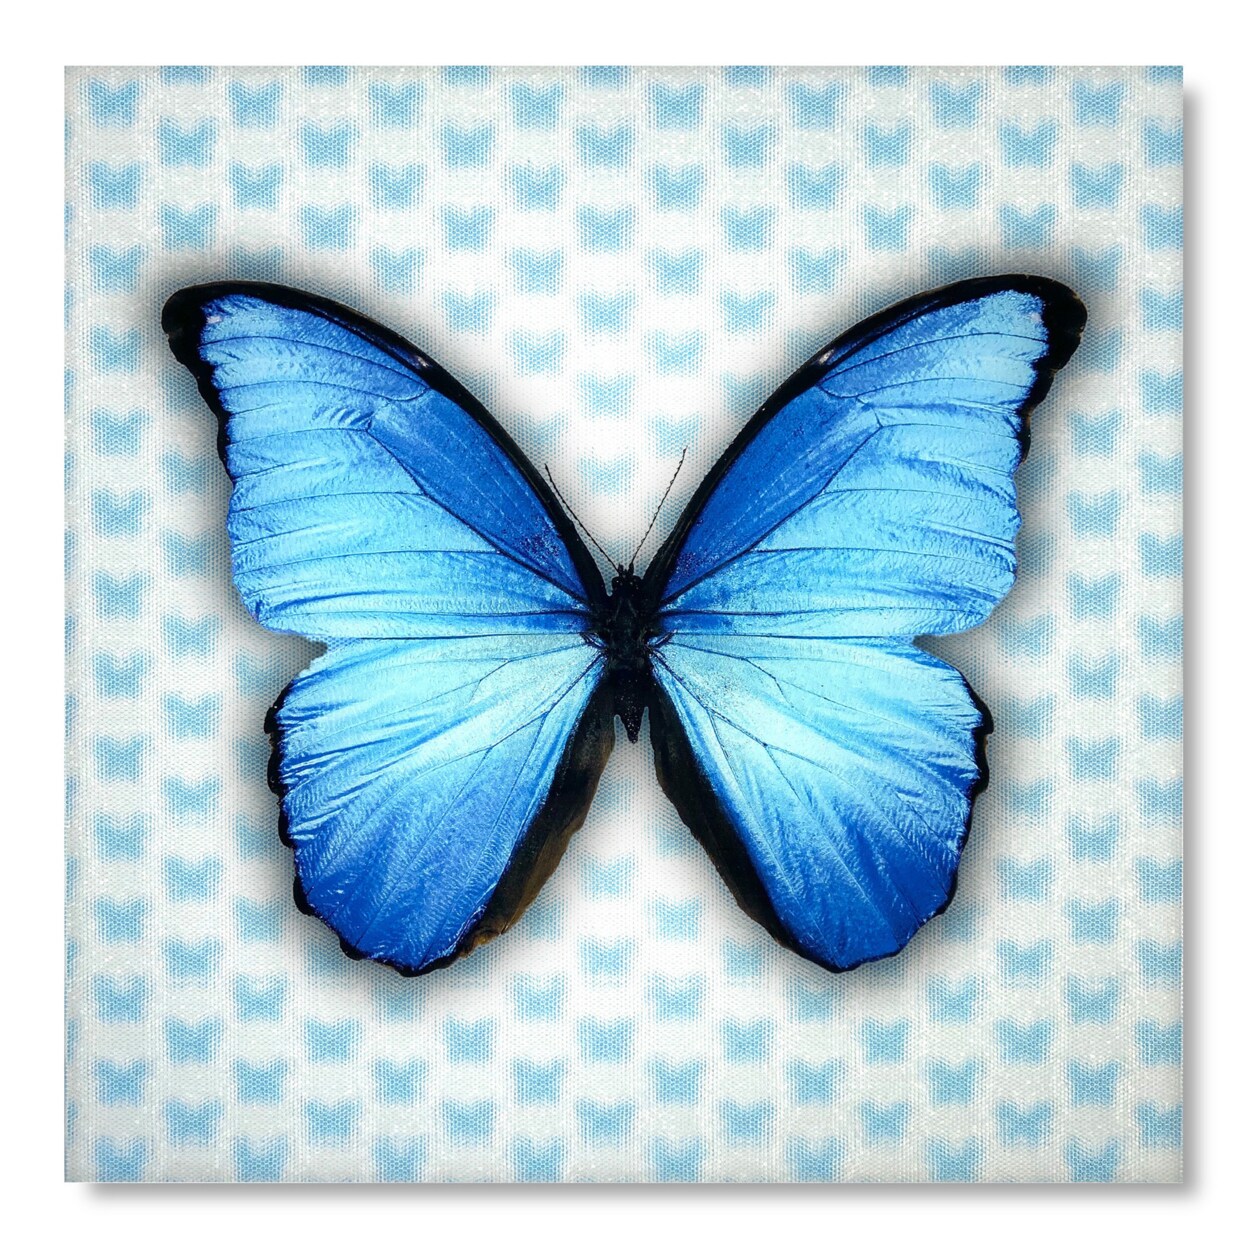  Butterfly Wall Stickers Mixed Color Butterfly Wall